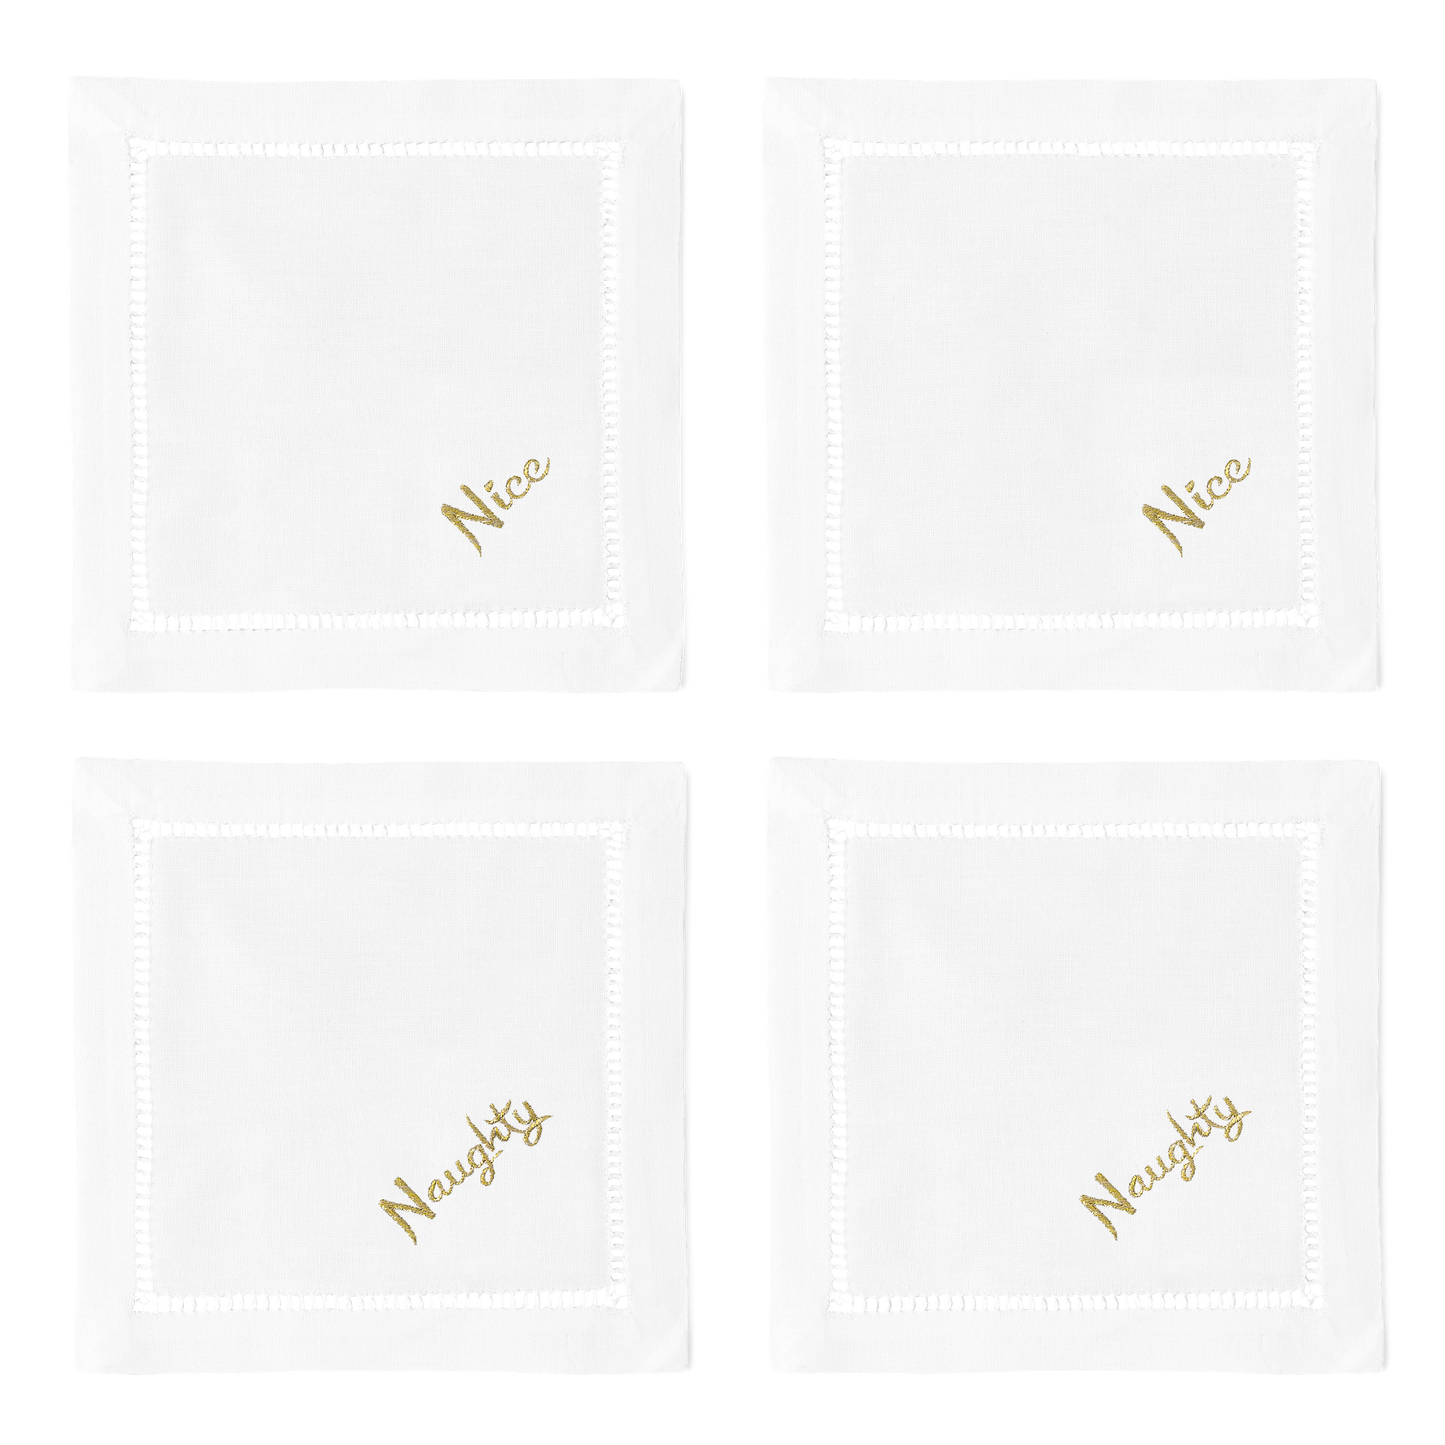 4 white cocktail napkins. Embroidered in the bottom right corner of 2 is the word “naughty”, with “nice” on the other 2